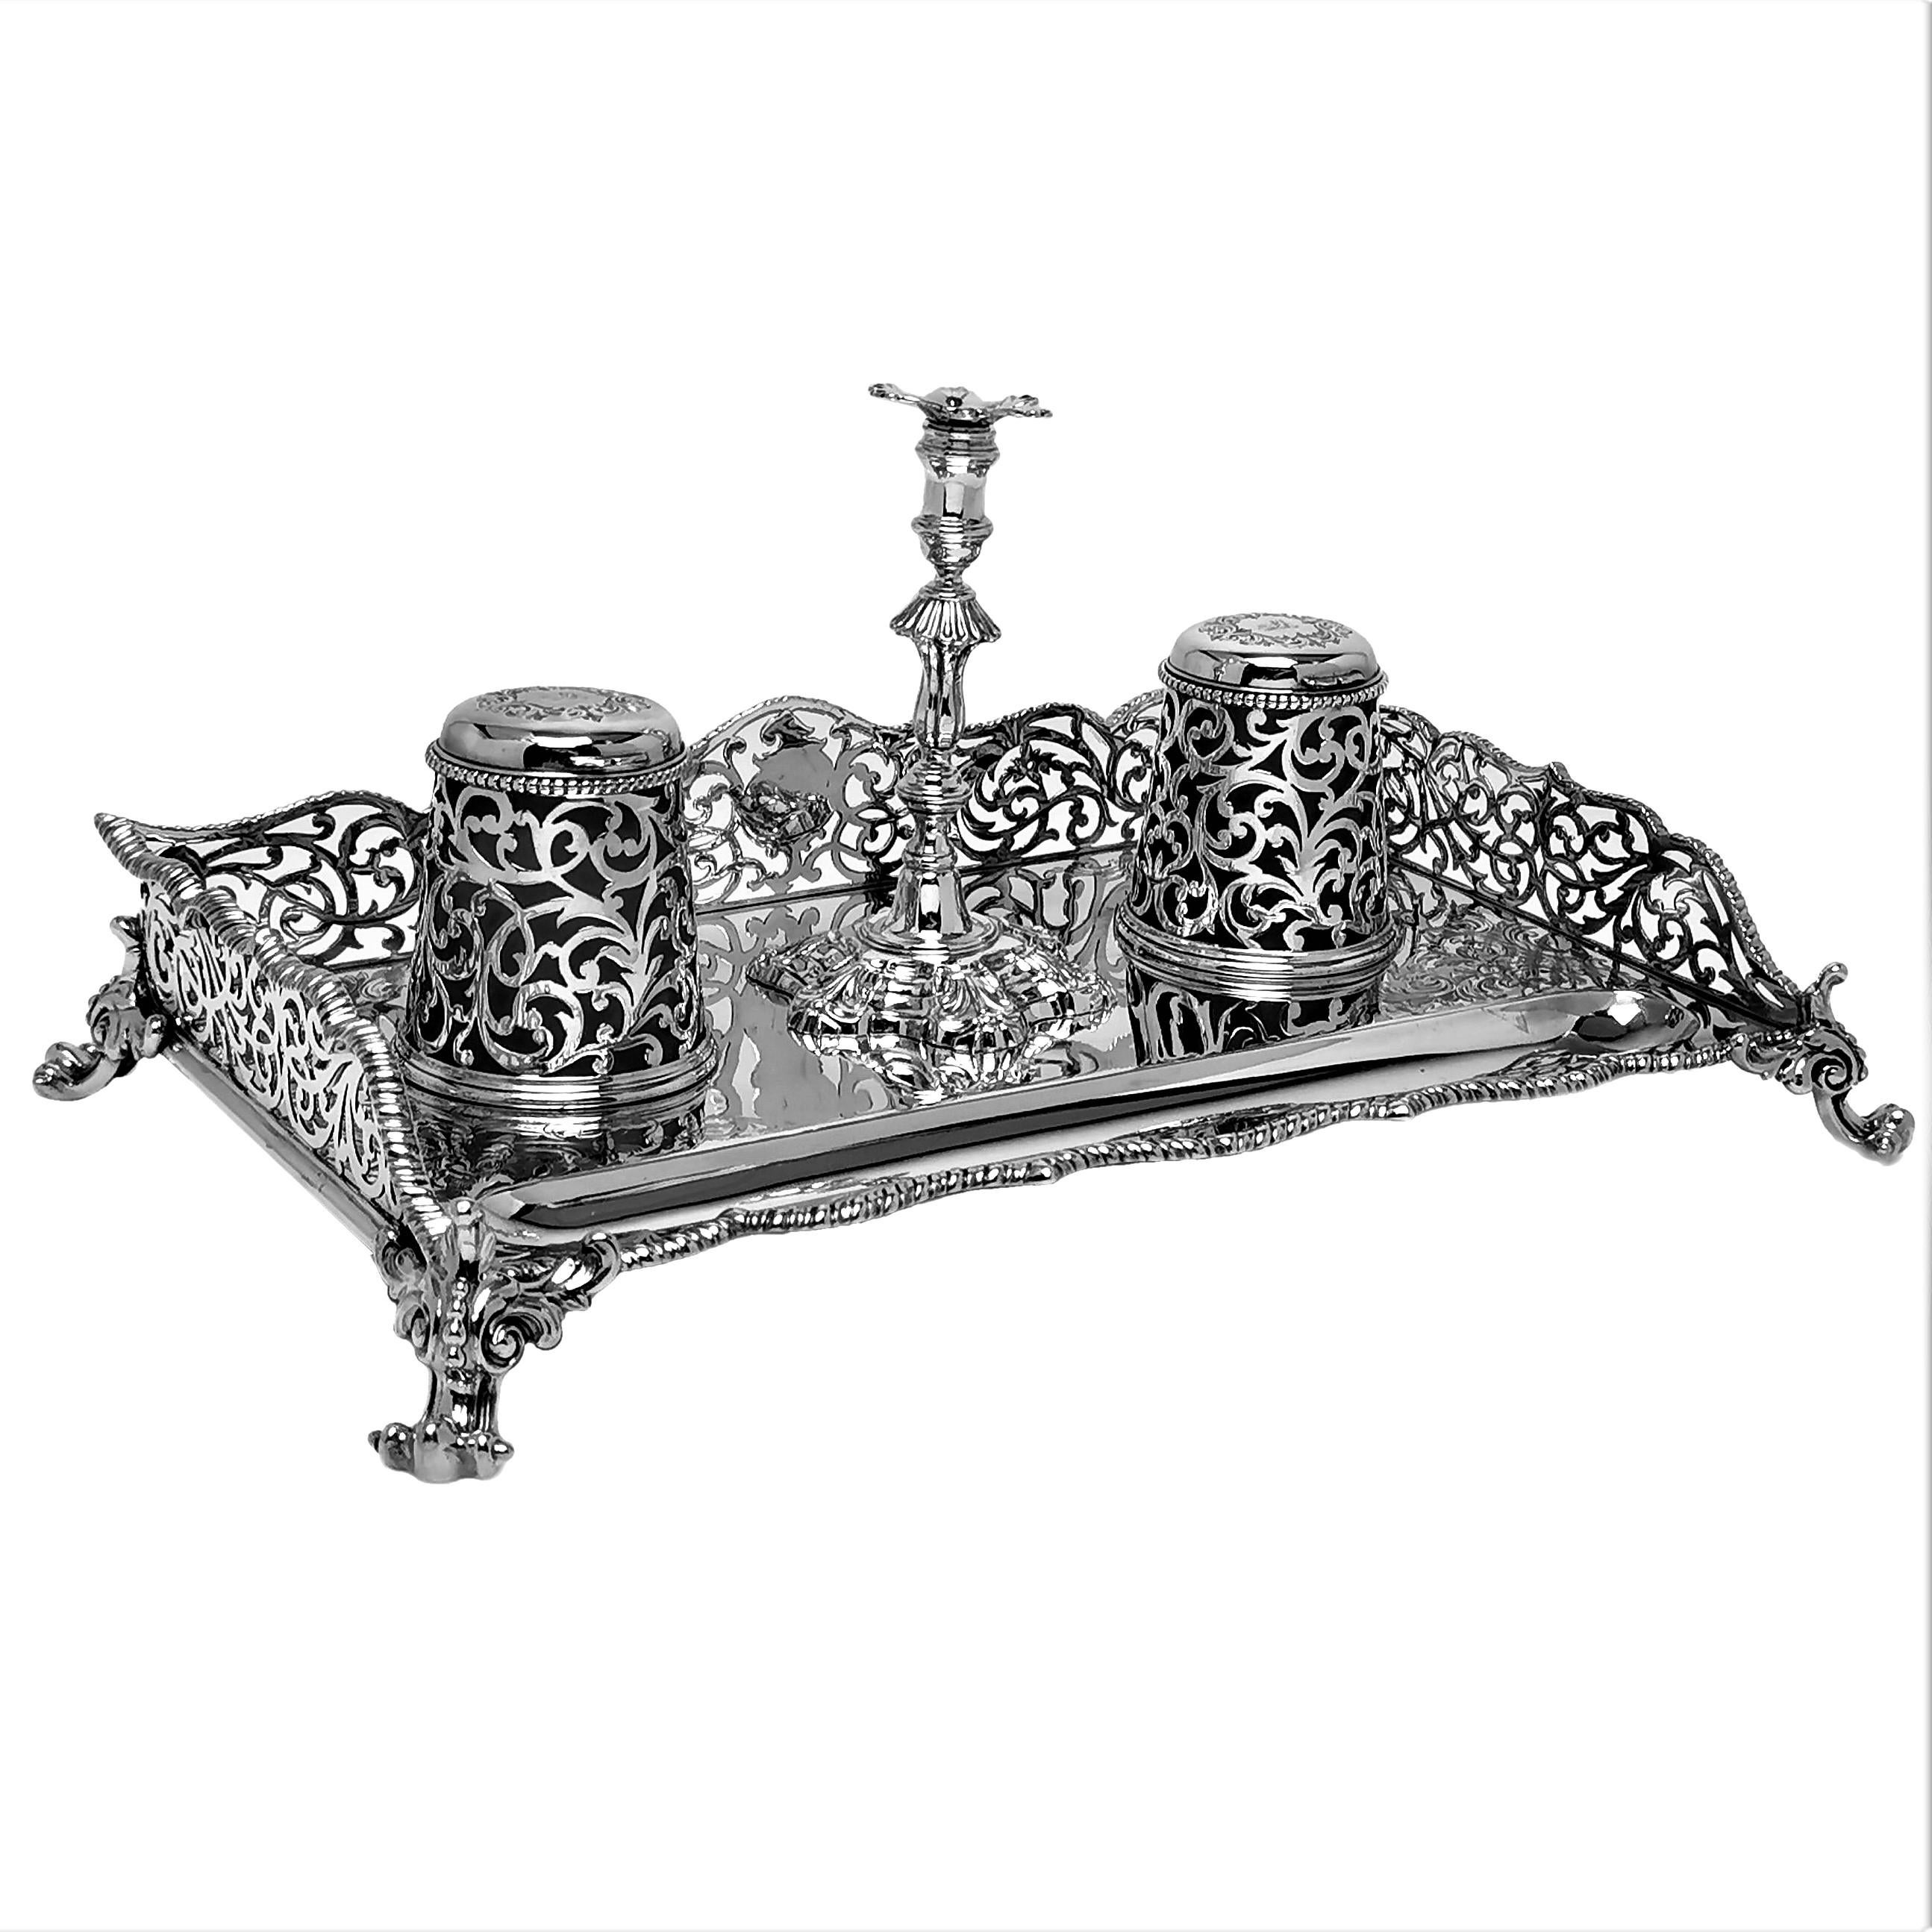 A beautiful Antique Victorian solid Silver Inkstand with two fitted glass lined Inkwells and a removable taper candlestick. The body of the inkwell has an elegant pierced design on the sides mirrored on the bodies of the inkwells. The base of the